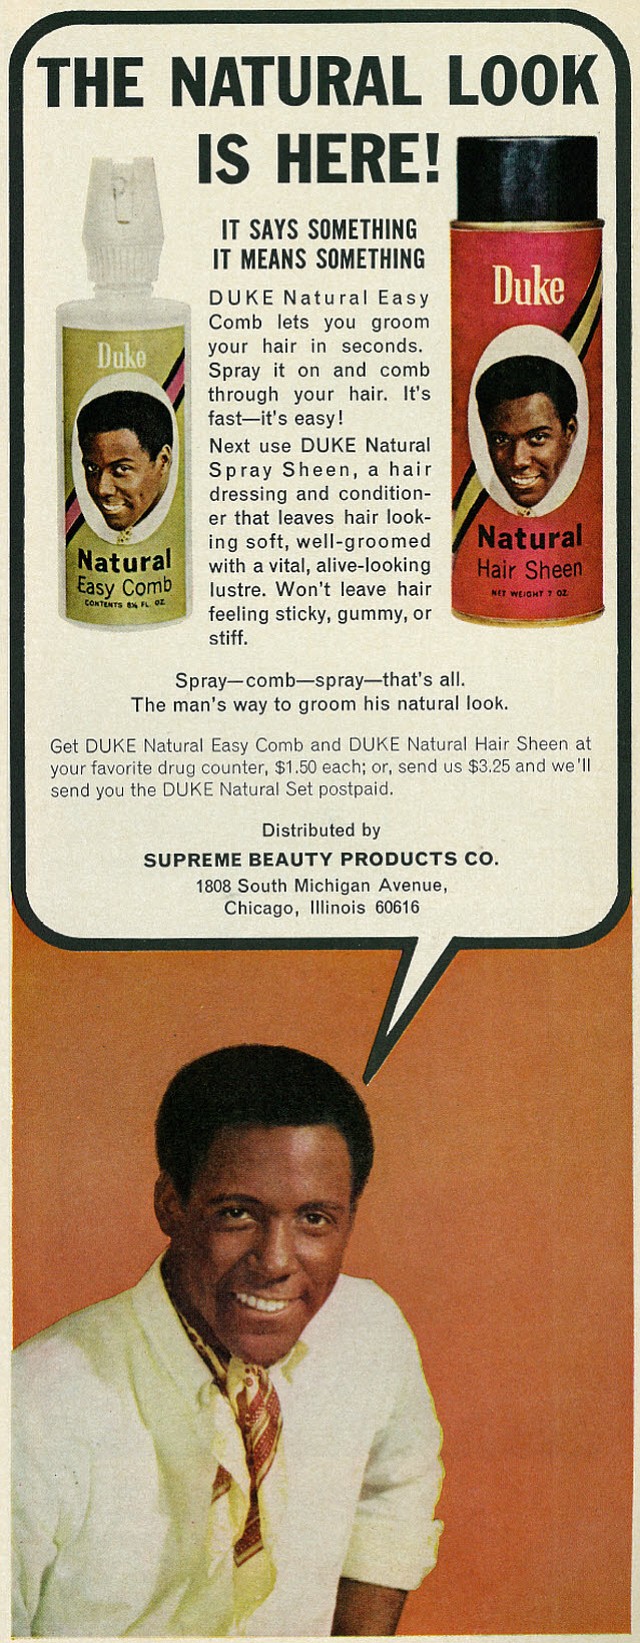 They say this cat's Duke Hair Sheen is for bad mothers. Richard Roundtree for Supreme Beauty Products. "Ebony," January 1968.